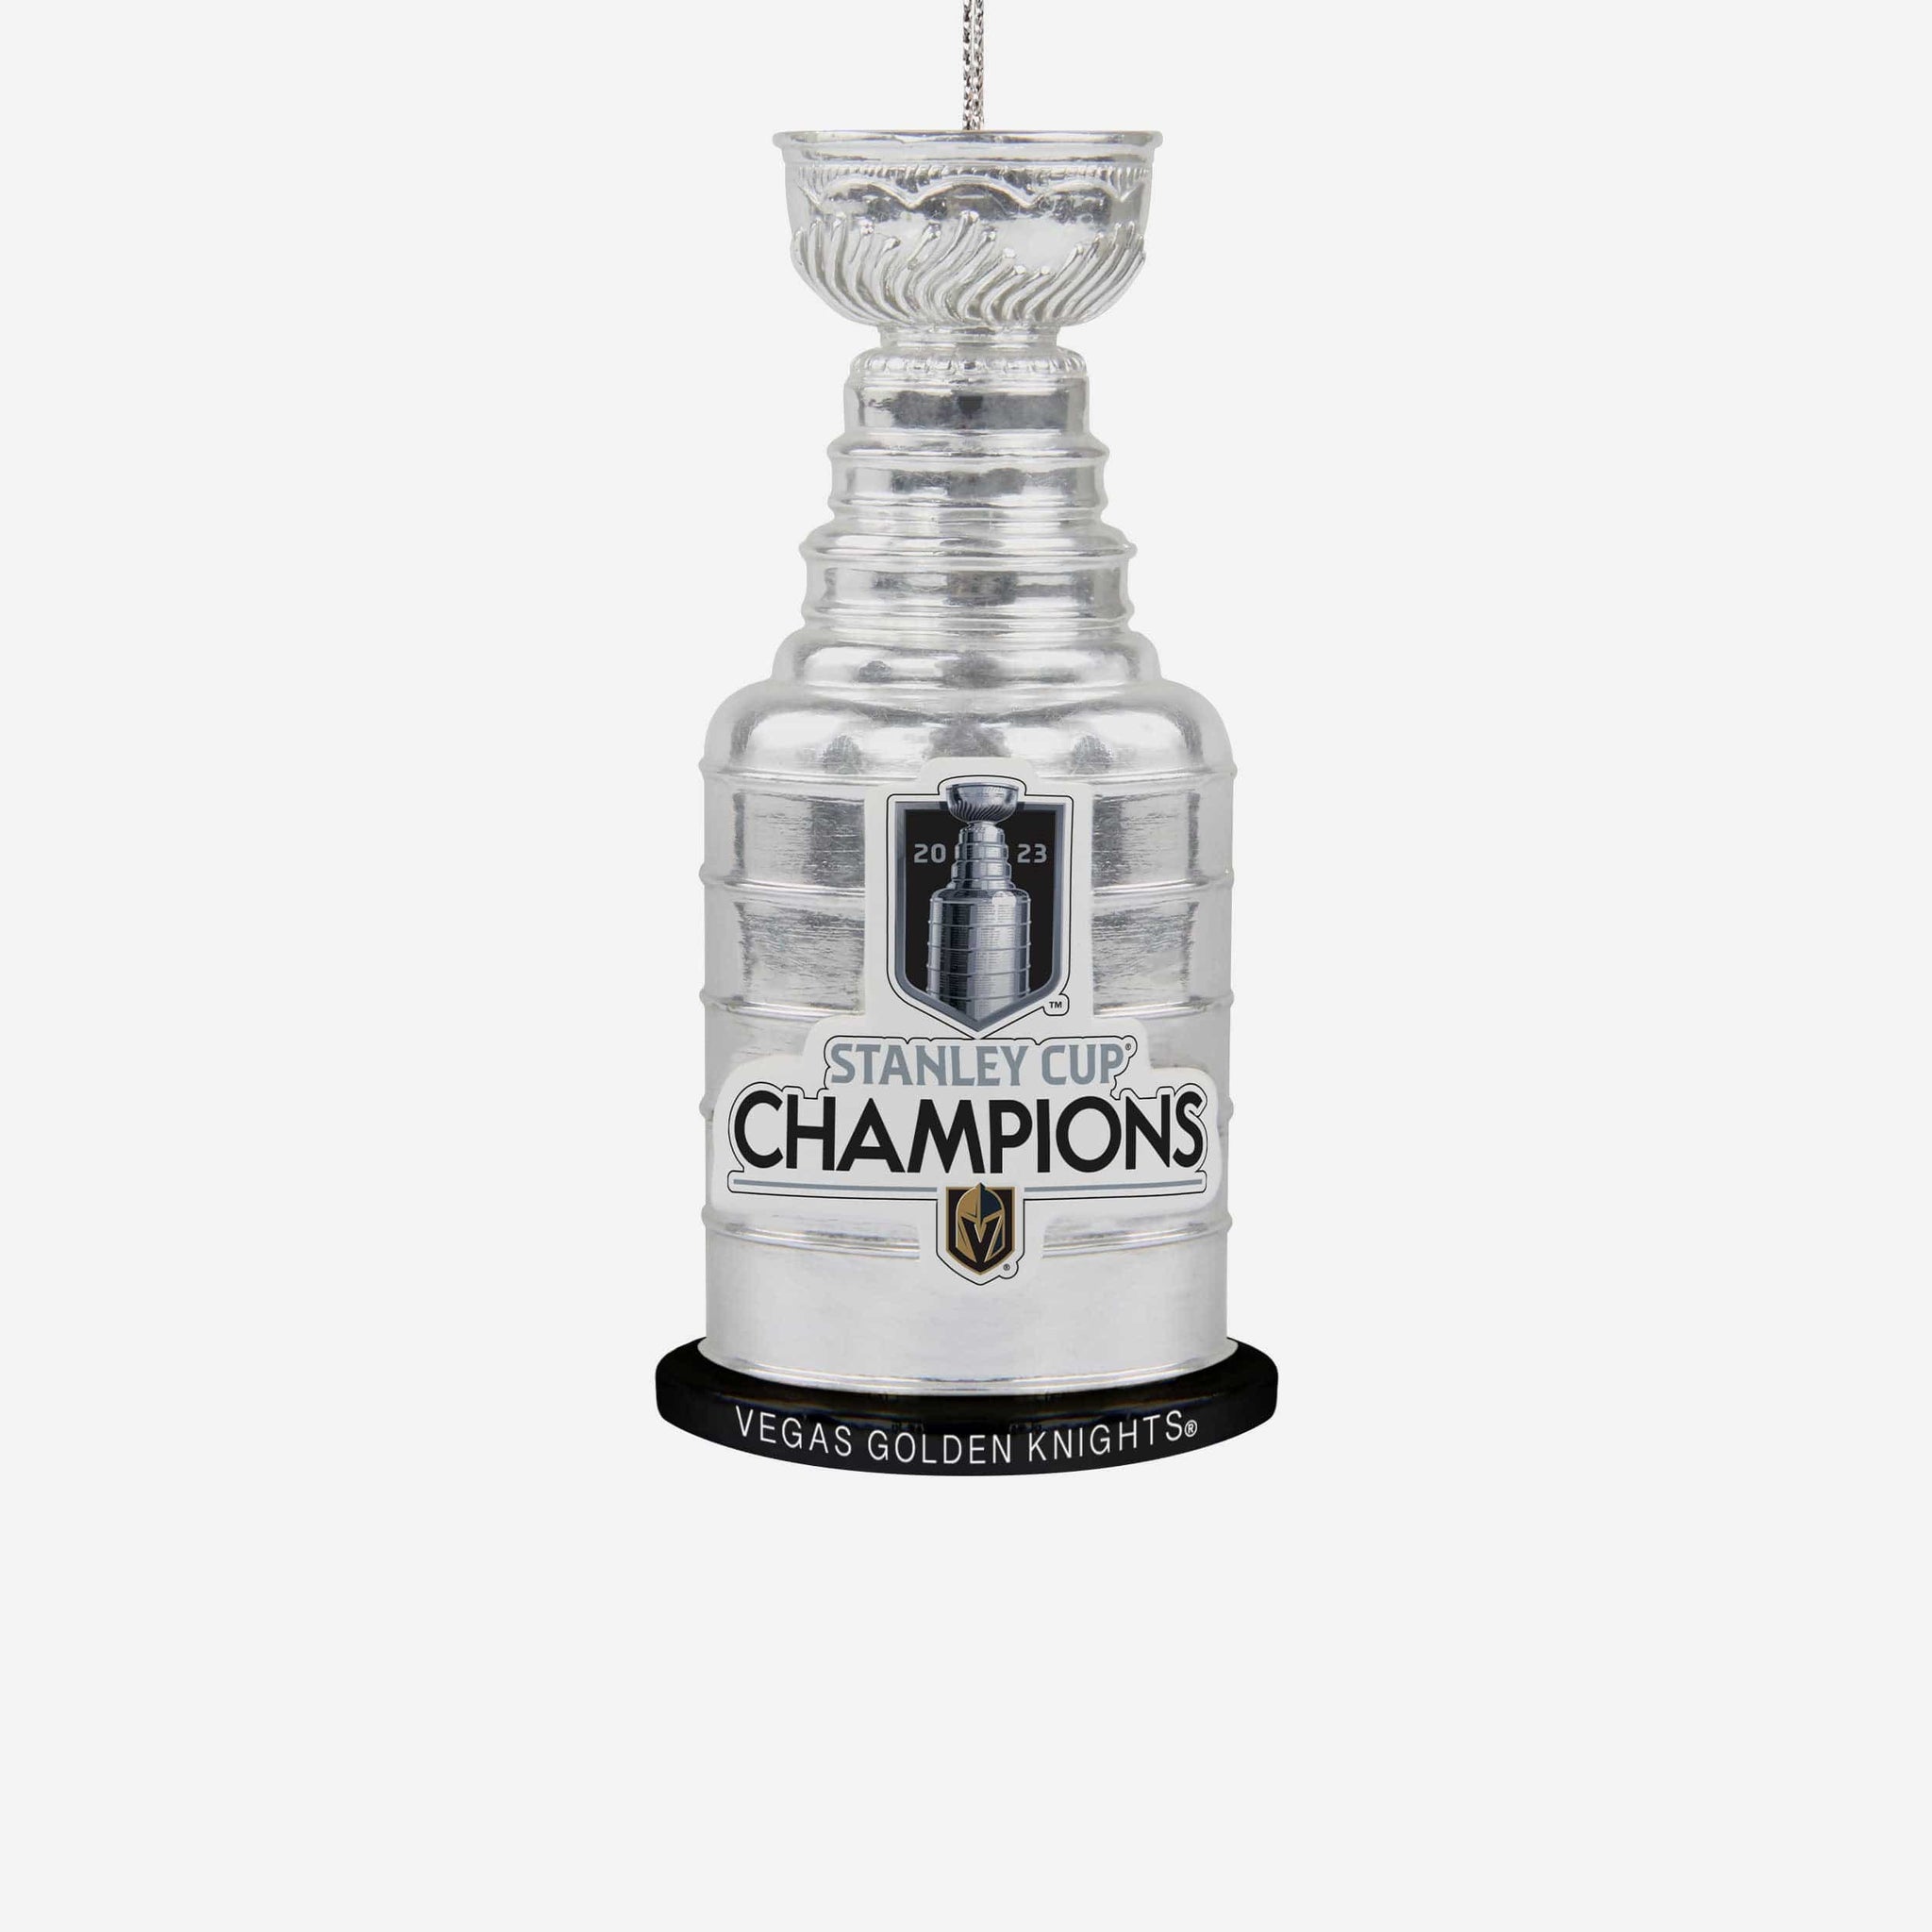 2023 Stanley Cup Champions Vegas Golden Knights NHL Team White